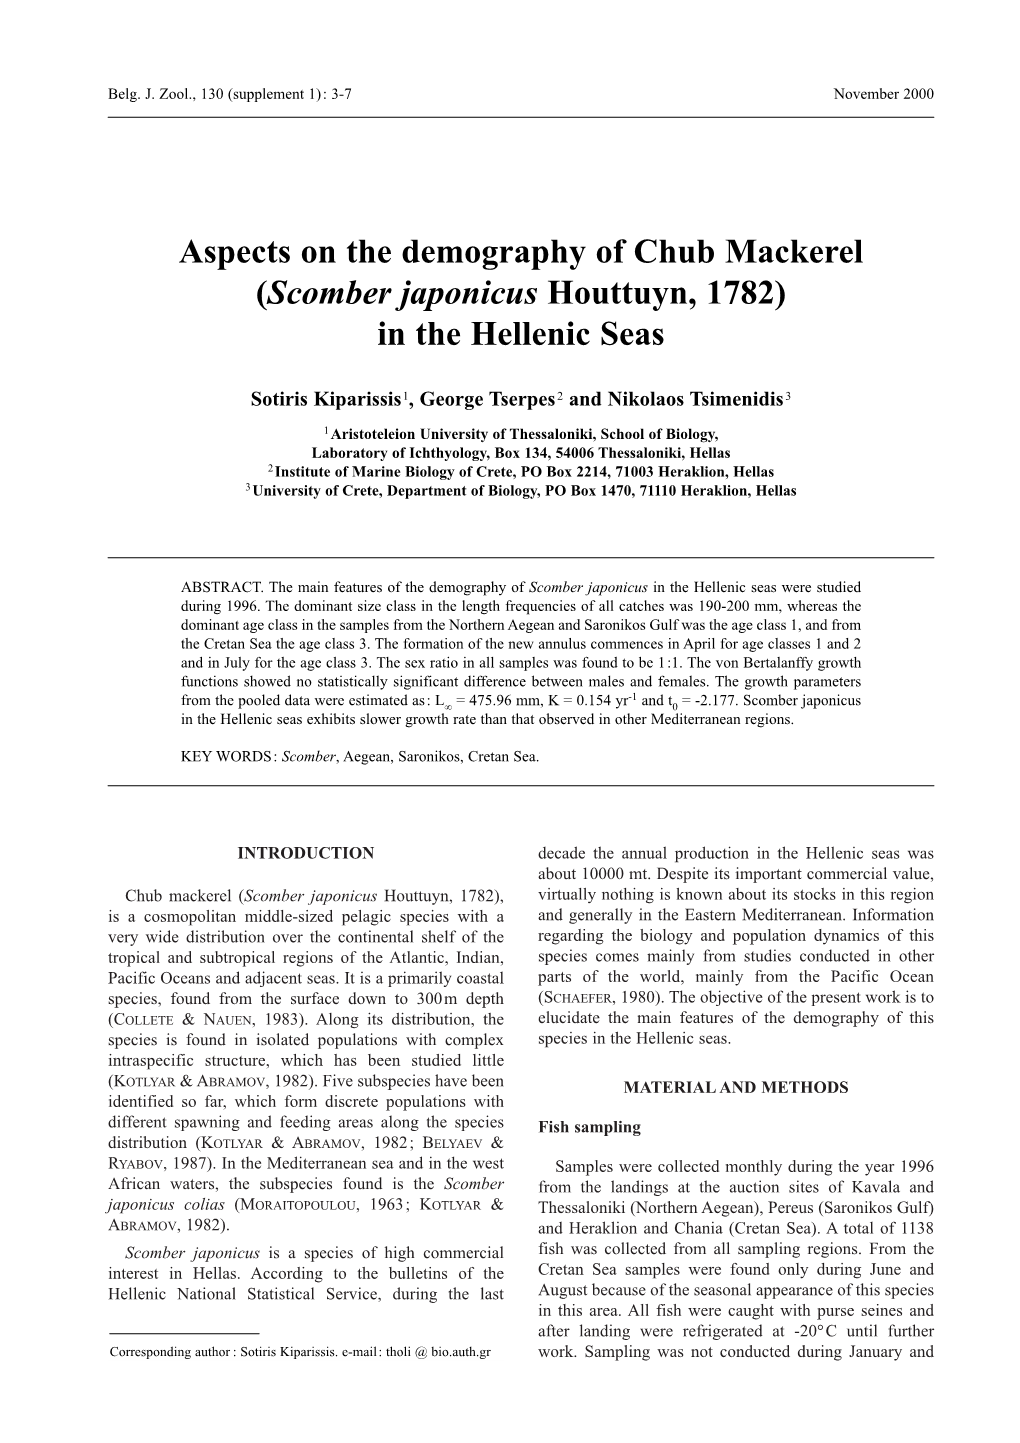 Aspects on the Demography of Chub Mackerel (Scomber Japonicus Houttuyn, 1782) in the Hellenic Seas